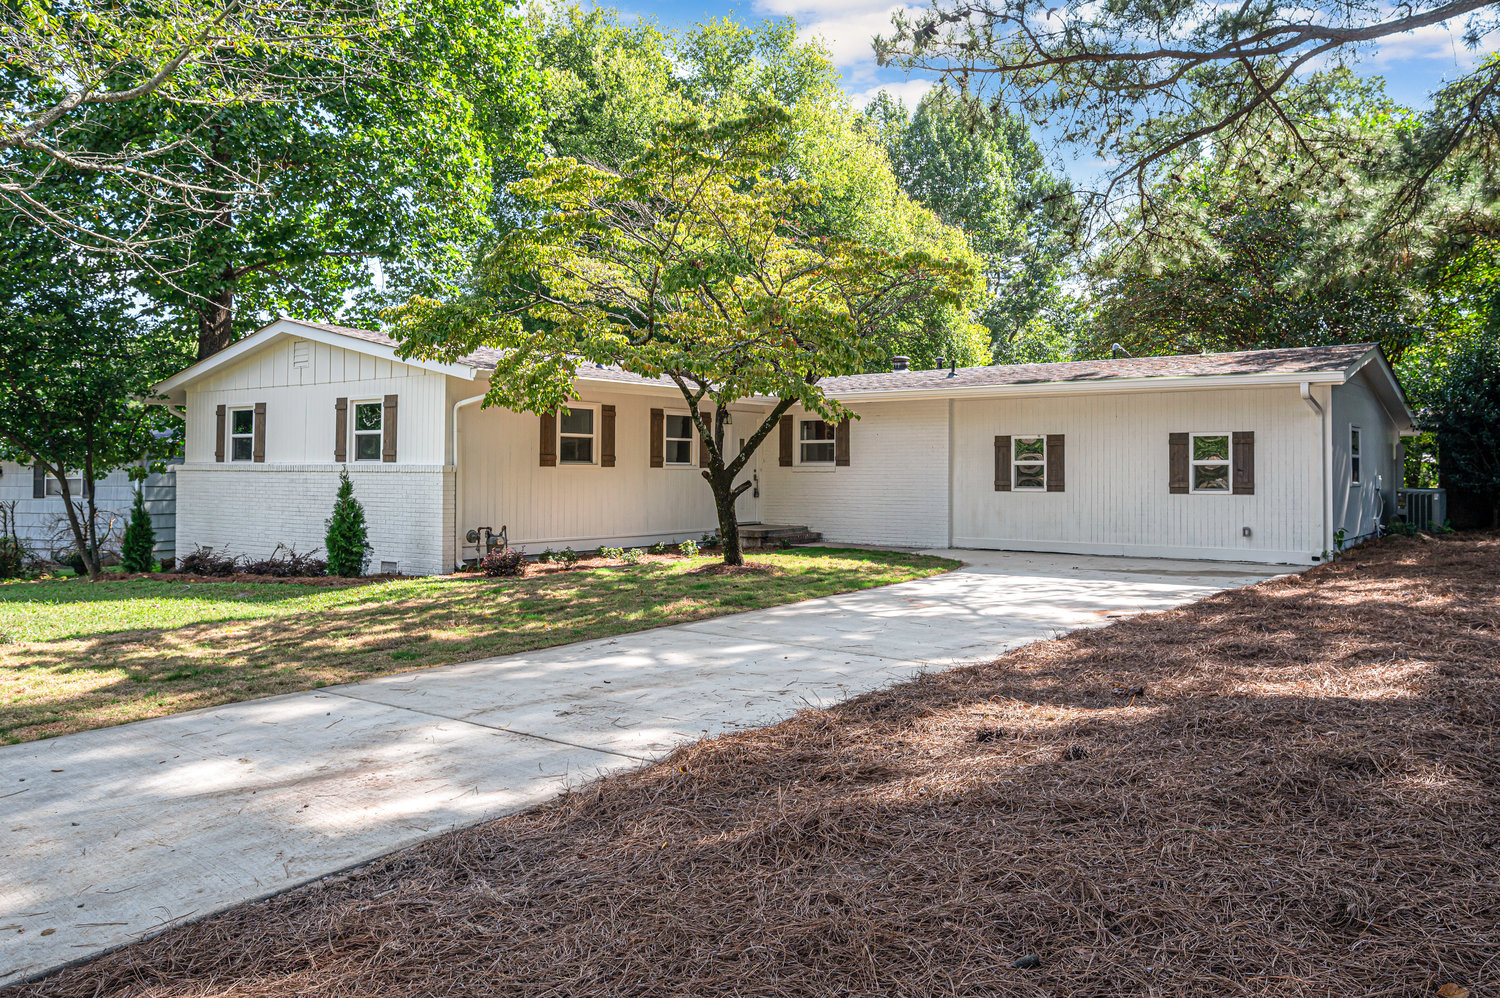 Virtual Tour of Birmingham Metro Real Estate Listing For Sale | 509 Brentwood Drive, Hoover, AL 35226